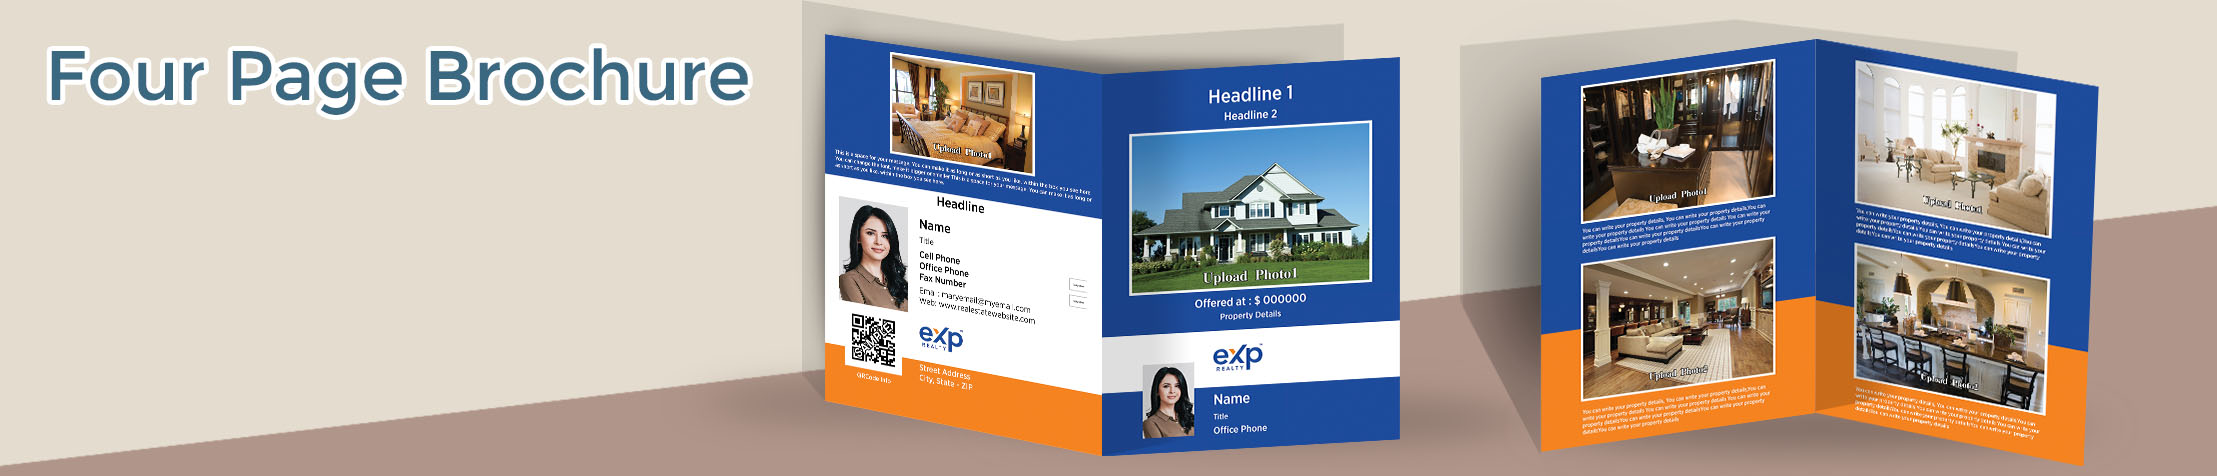  Real Estate Flyers and Brochures -  four page brochure templates for open houses and marketing | BestPrintBuy.com